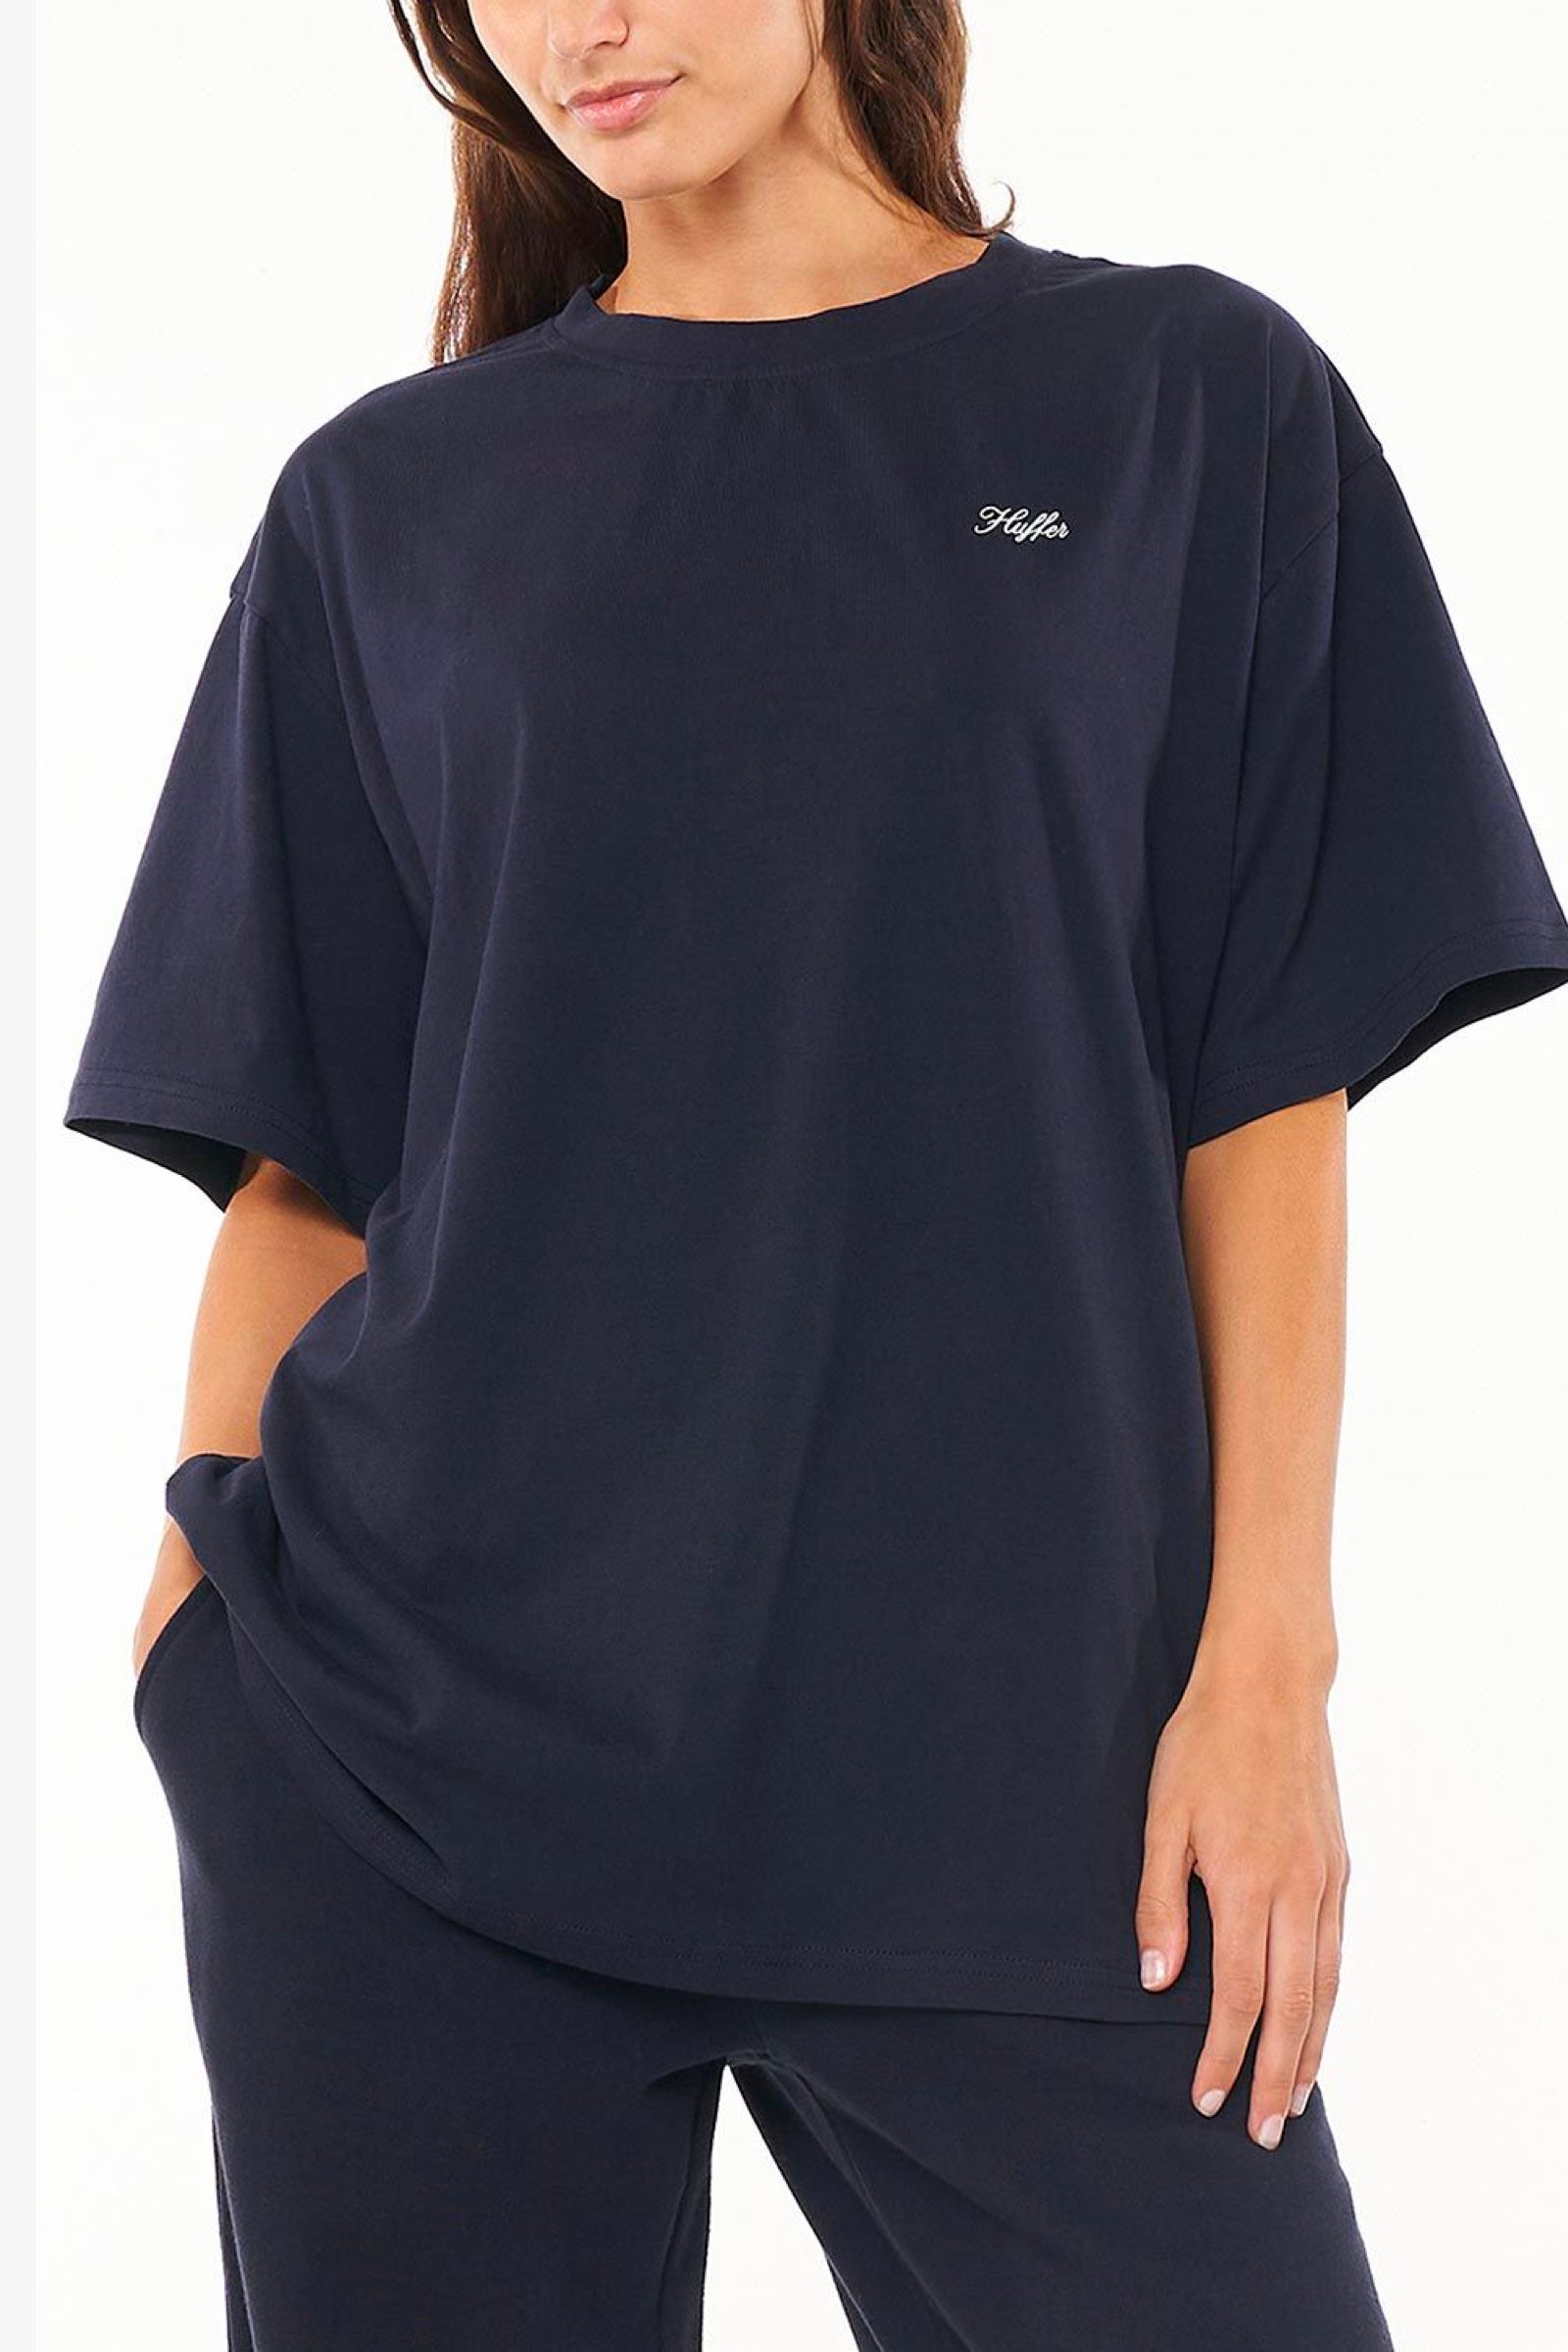 WMNS SLOUCH TEE/CHAMP - NAVY